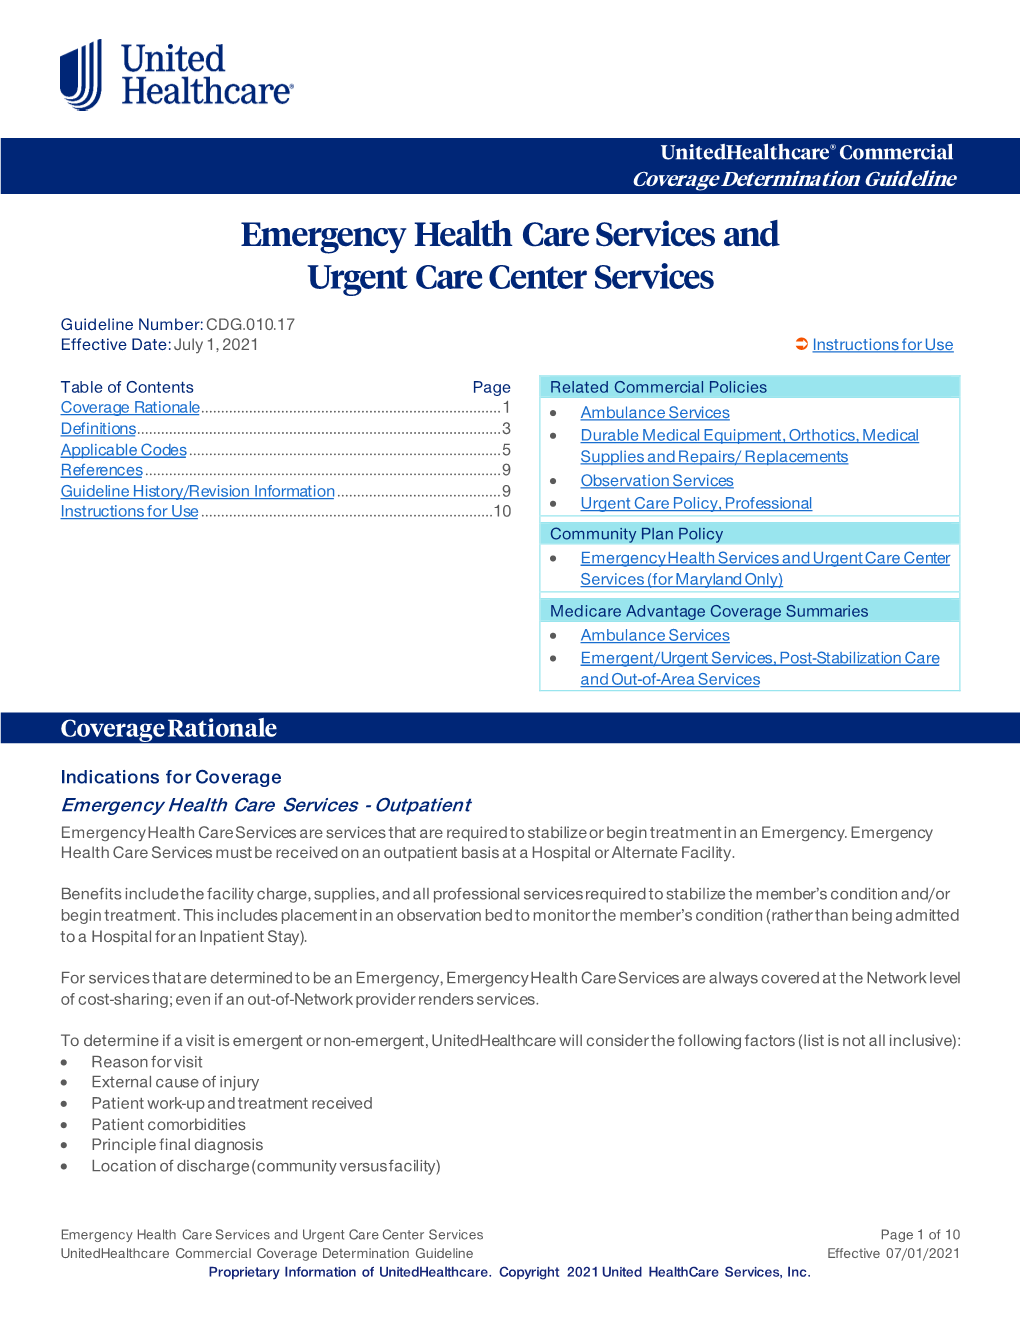 Emergency Health Care Services and Urgent Care Center Services